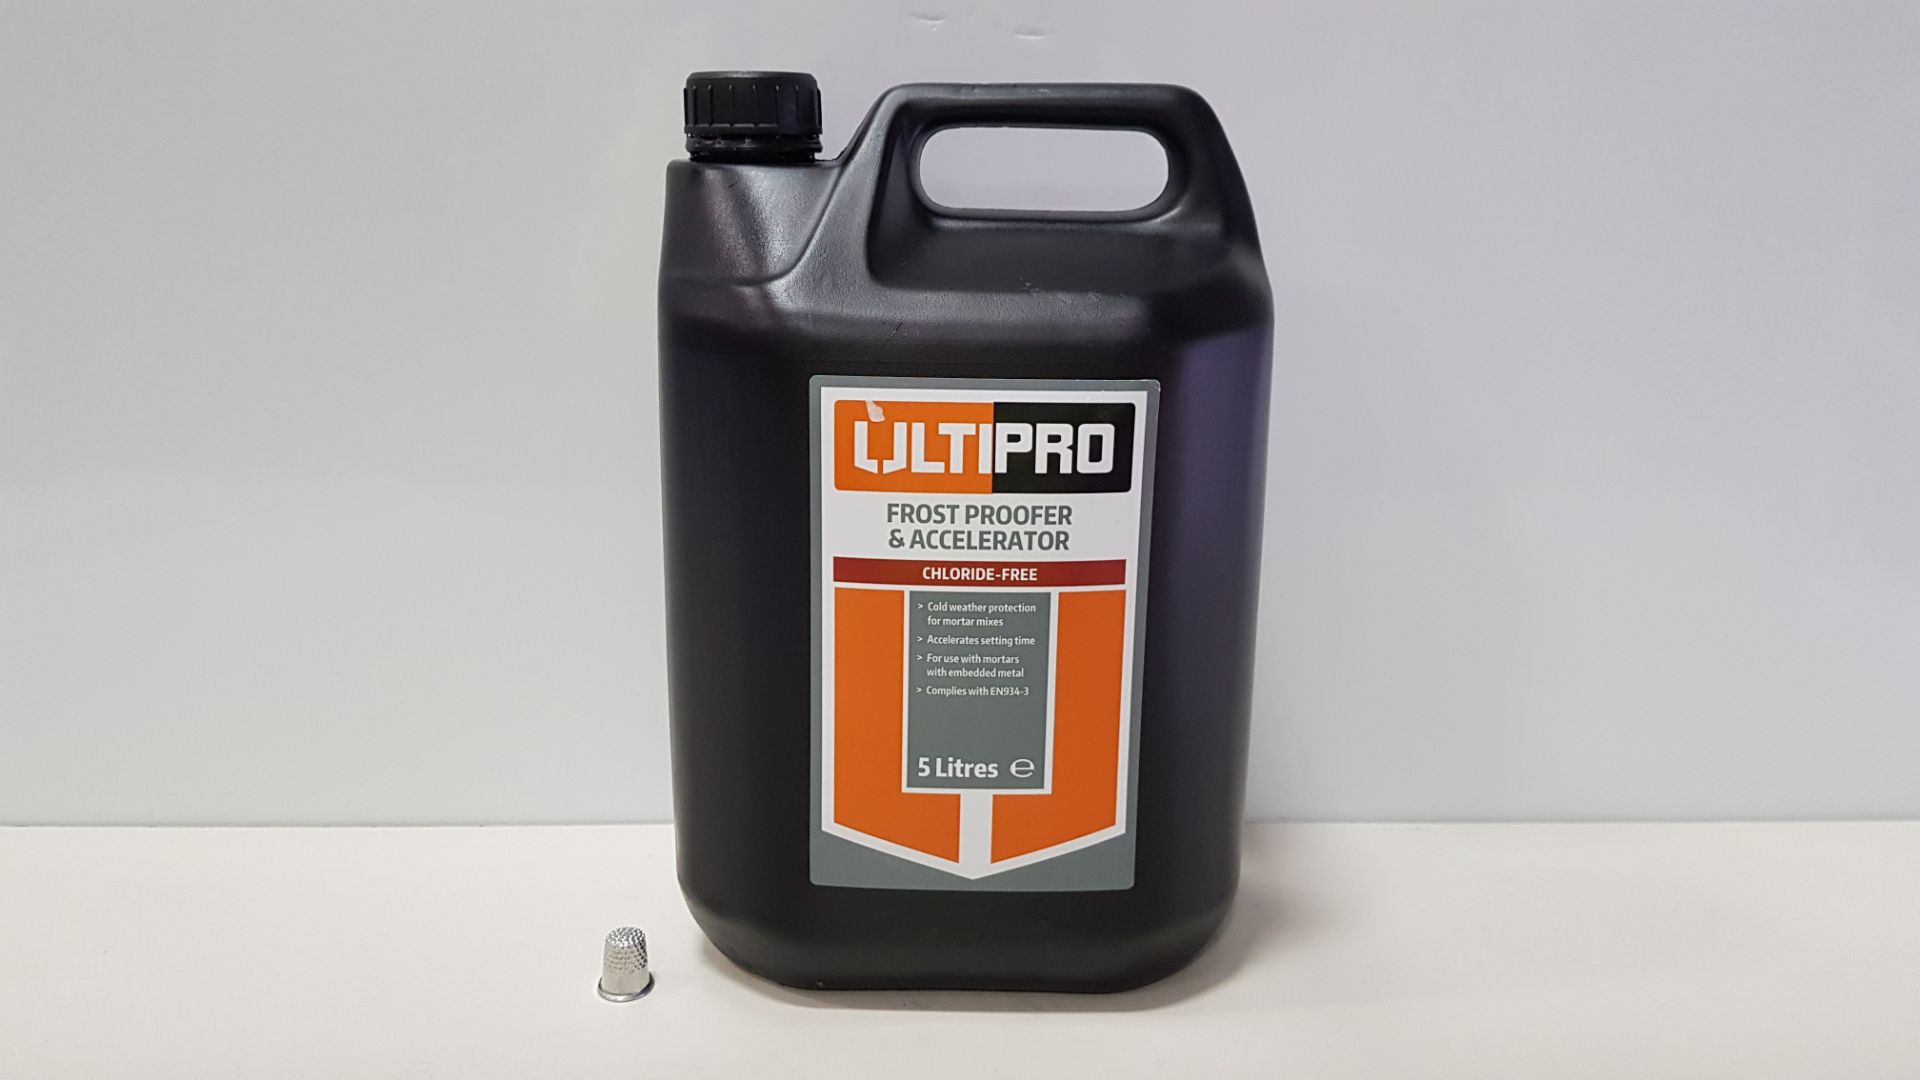 60 X BRAND NEW 5 LITRE ULTIPRO FROST PROOFER & ACCELERATOR (COLD WEATHER PROTECTION FOR MORTAR